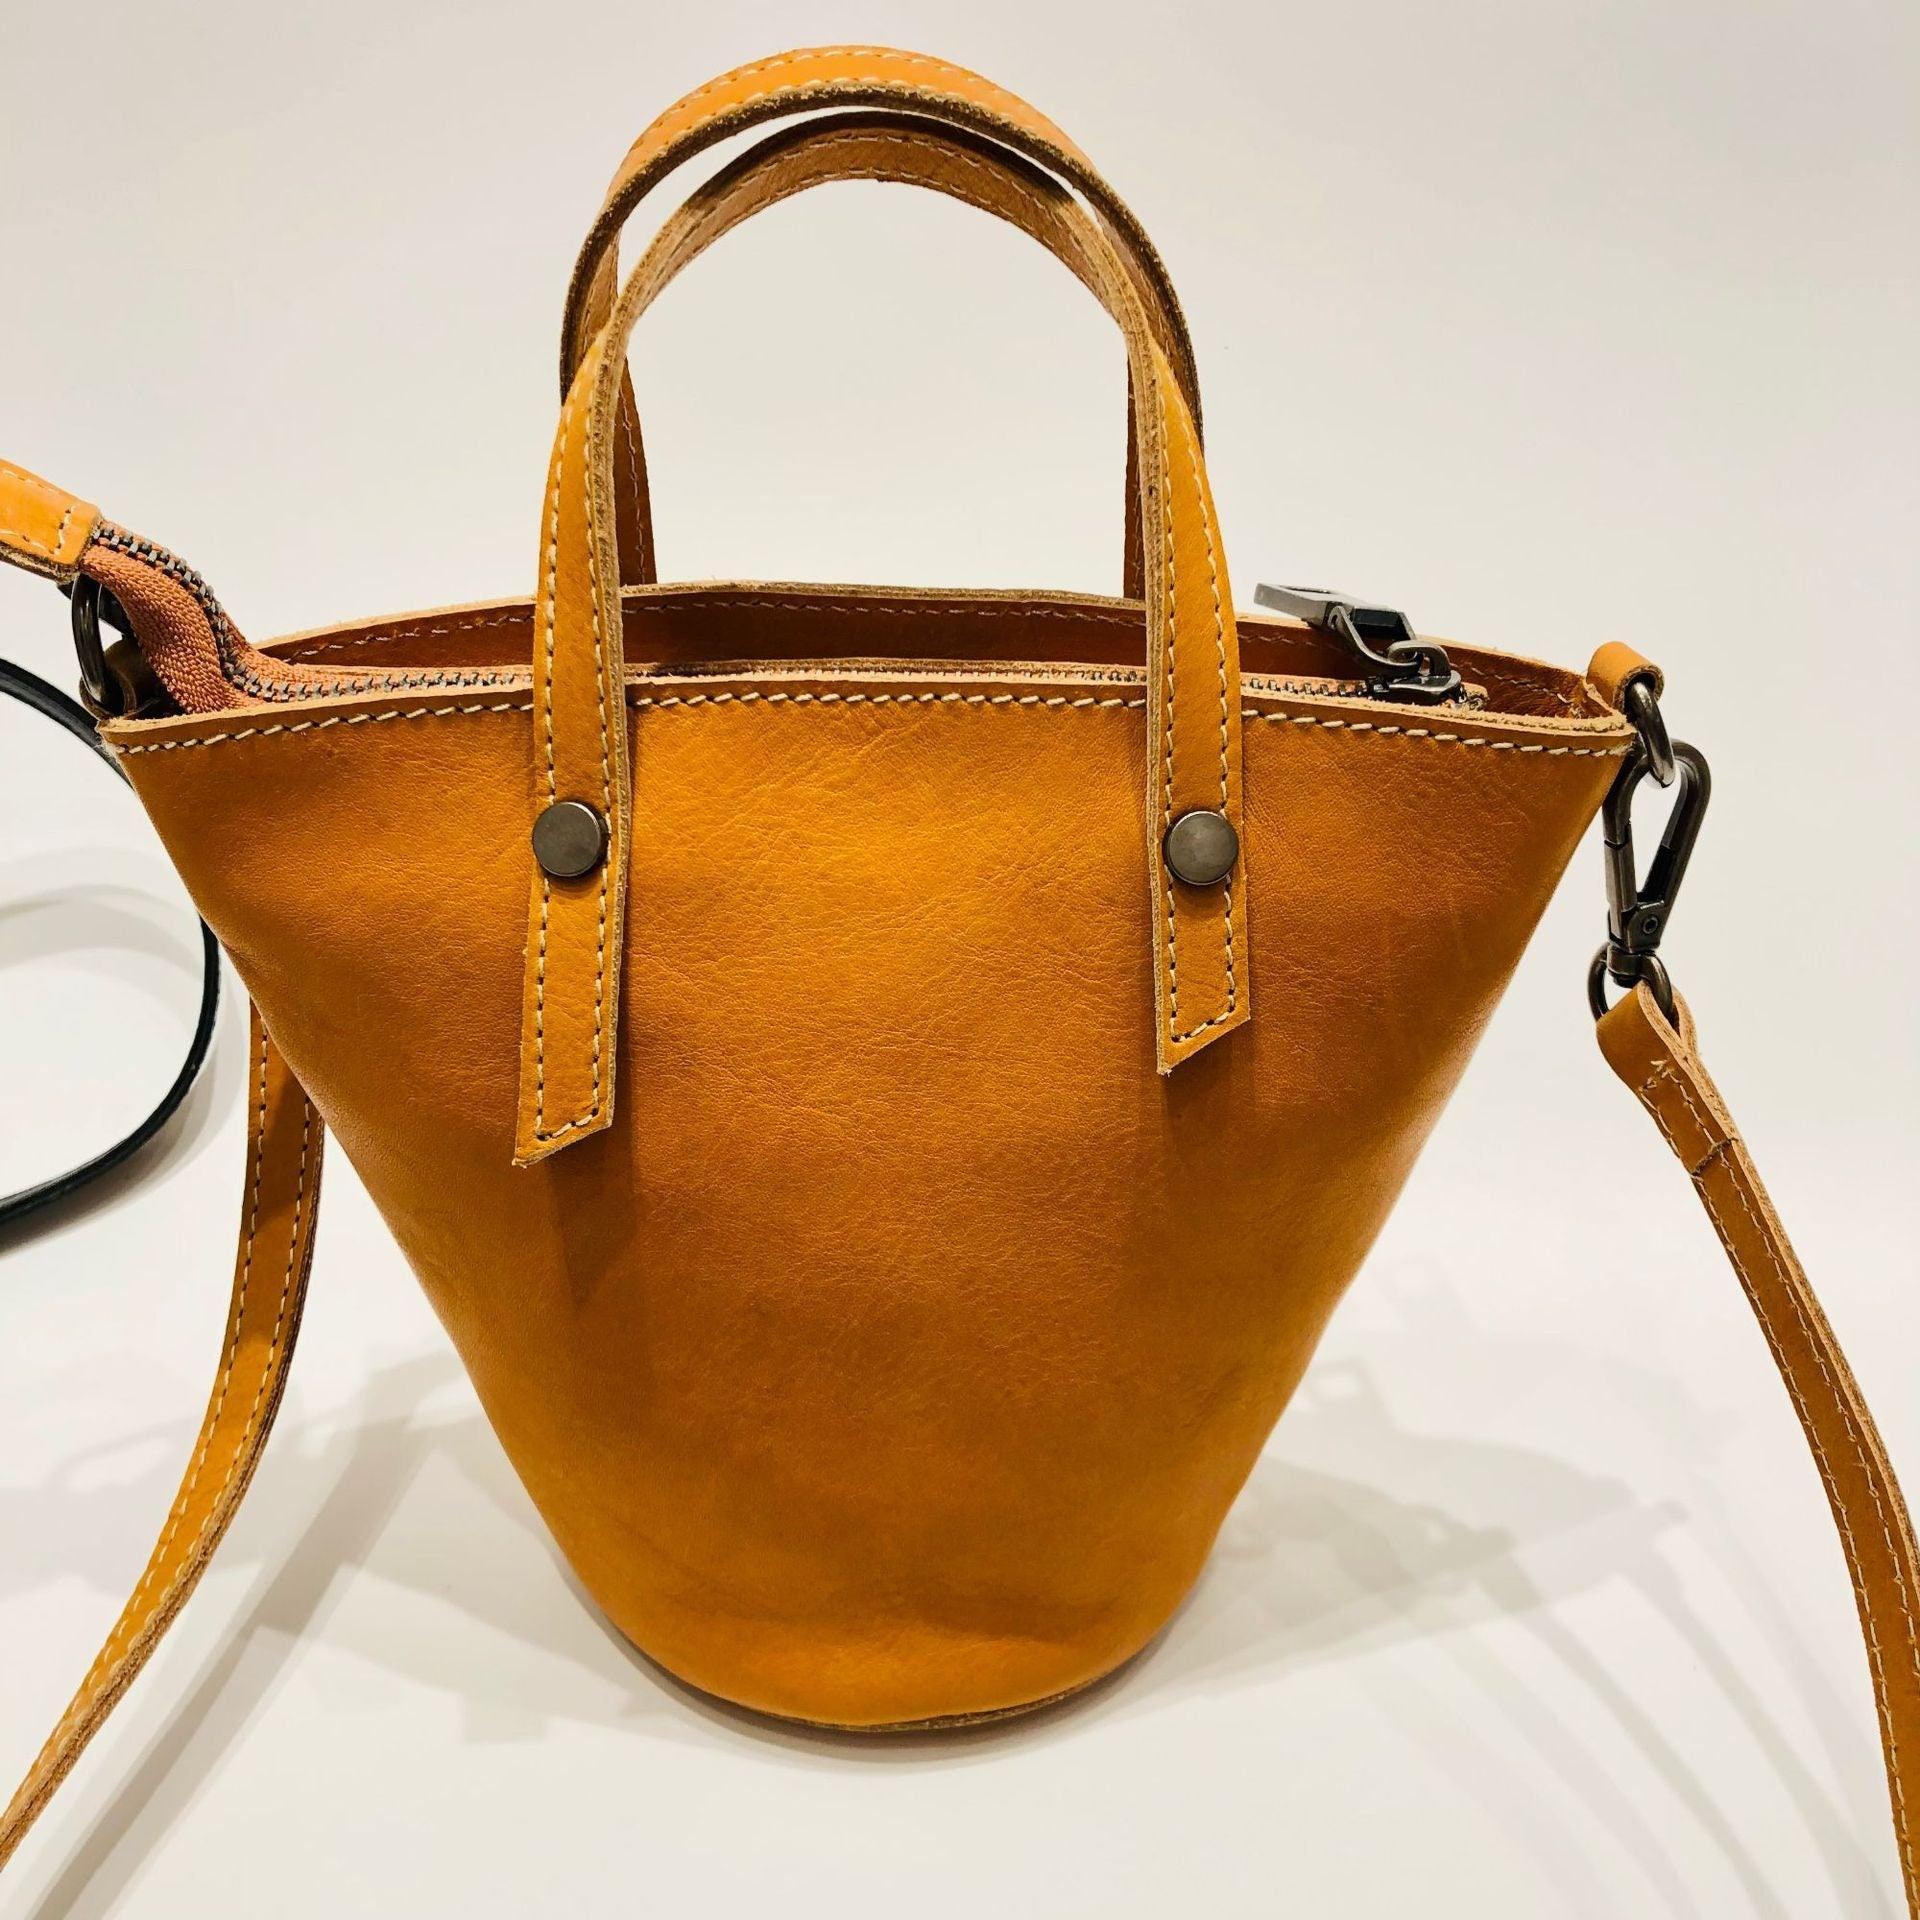 Small Bag Unisex,Womens Bag Leather,Leather Hip Bag,Men Hip Bag Leather,Festival Leather CrossBody Bag,Leather Small Bag